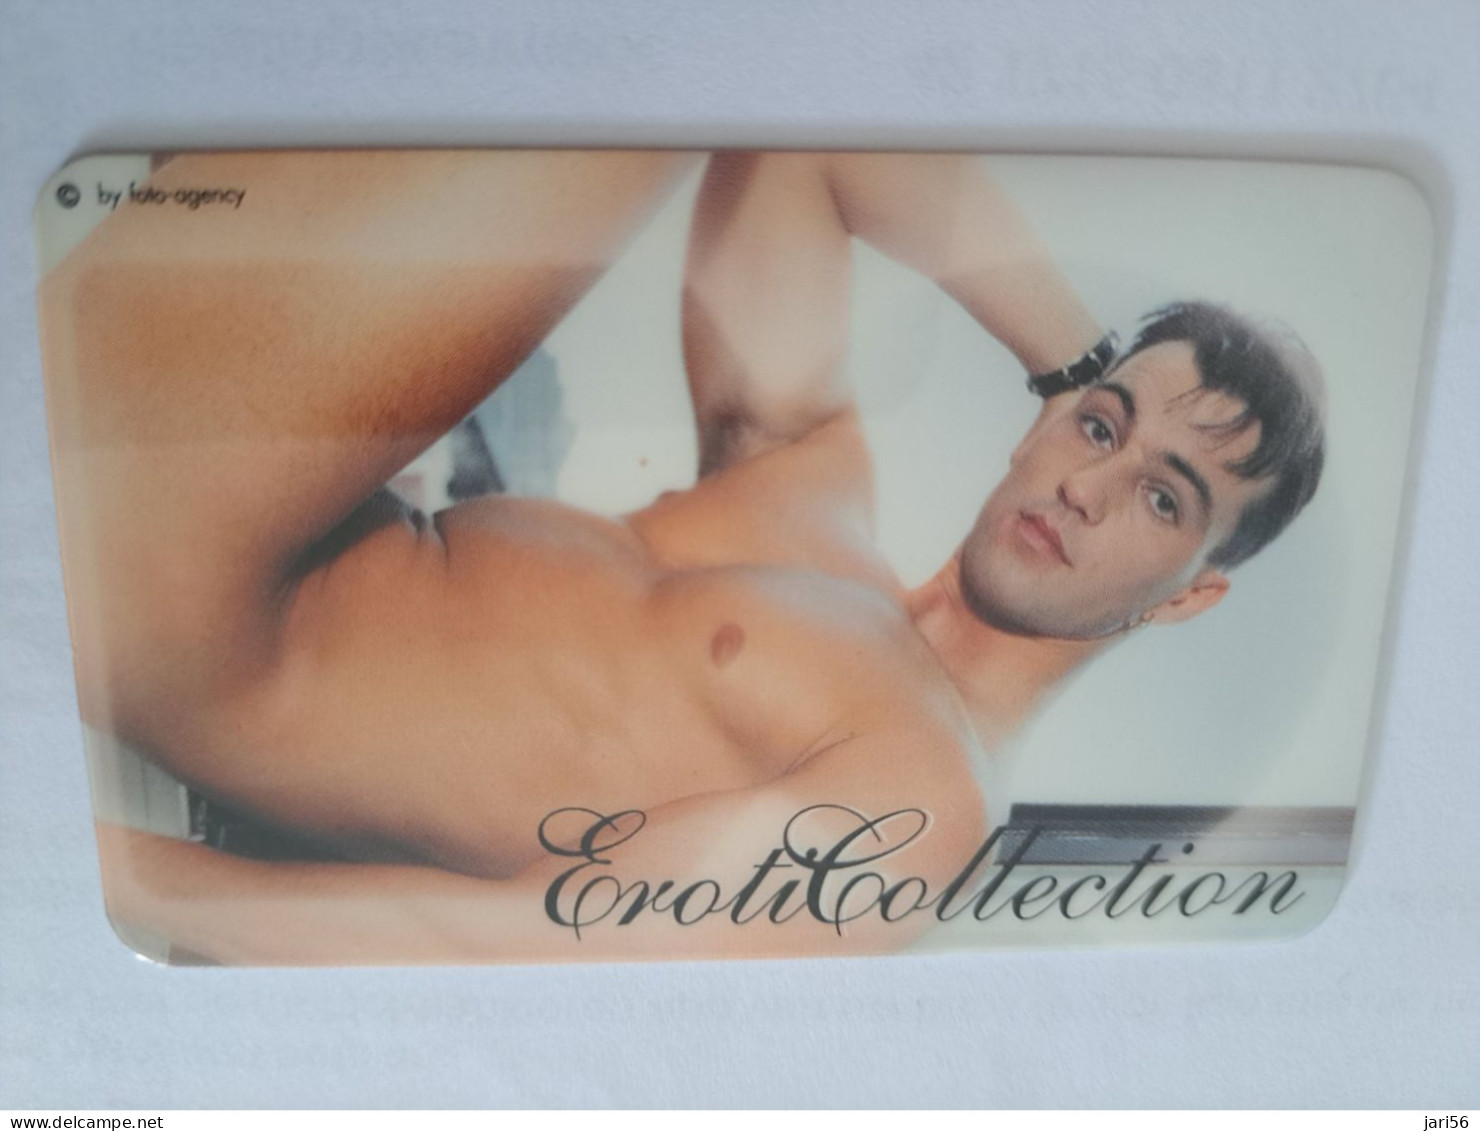 GREAT BRITAIN /20 UNITS / EROTIC COLLECTION / MODEL / NAKED MAN  / (date 09/00)  PREPAID CARD / MINT  **14305** - [10] Sammlungen